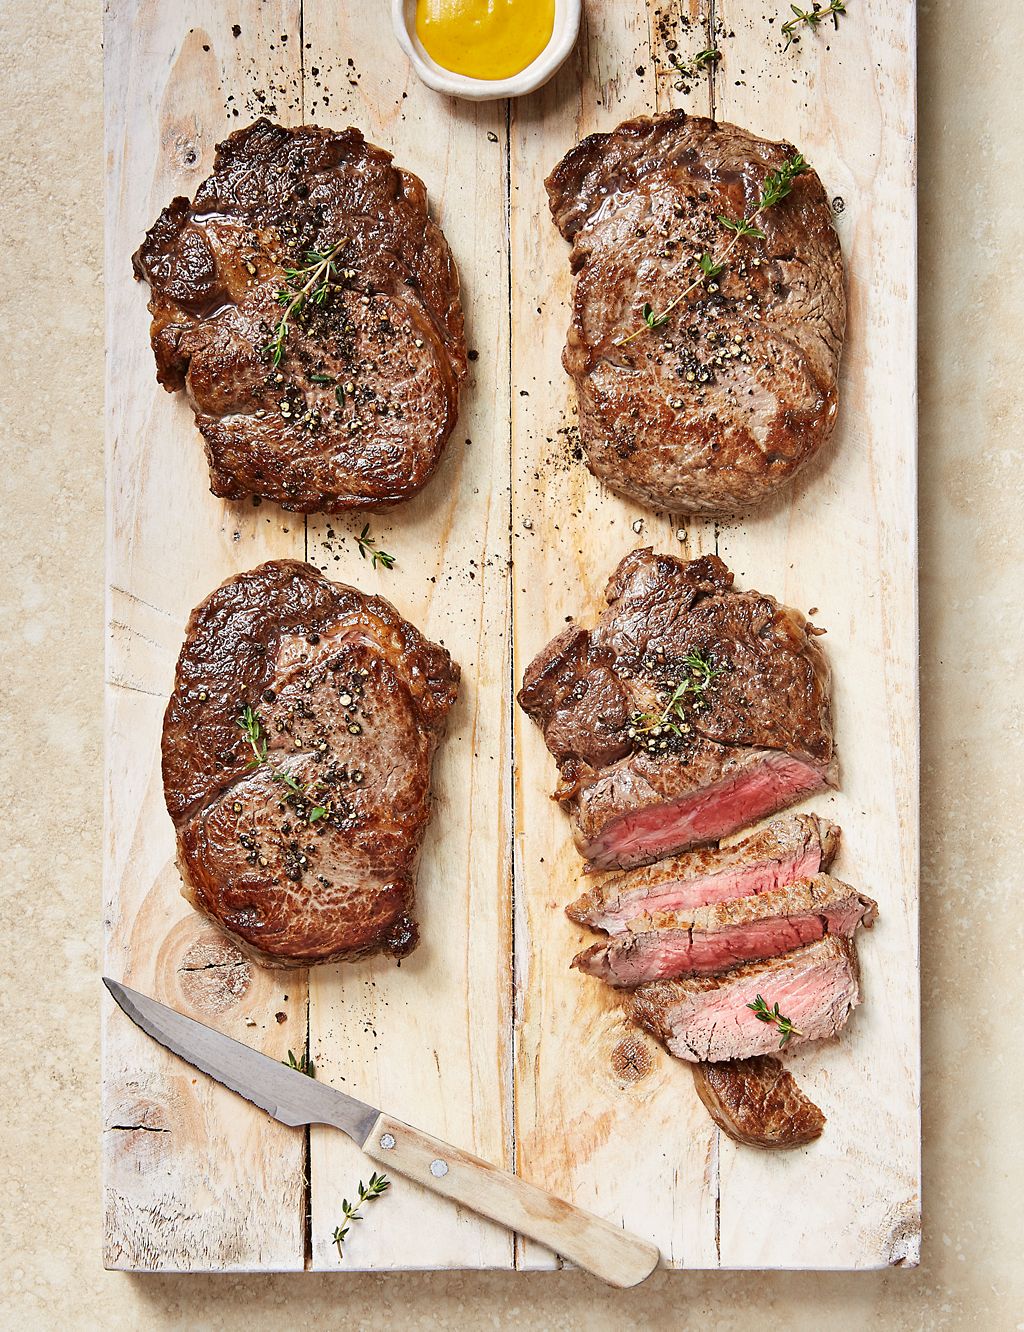 Aberdeen Angus Thick Cut Ribeye Steaks (4 Pieces) - (Last Collection Date 30th September 2020) 3 of 3